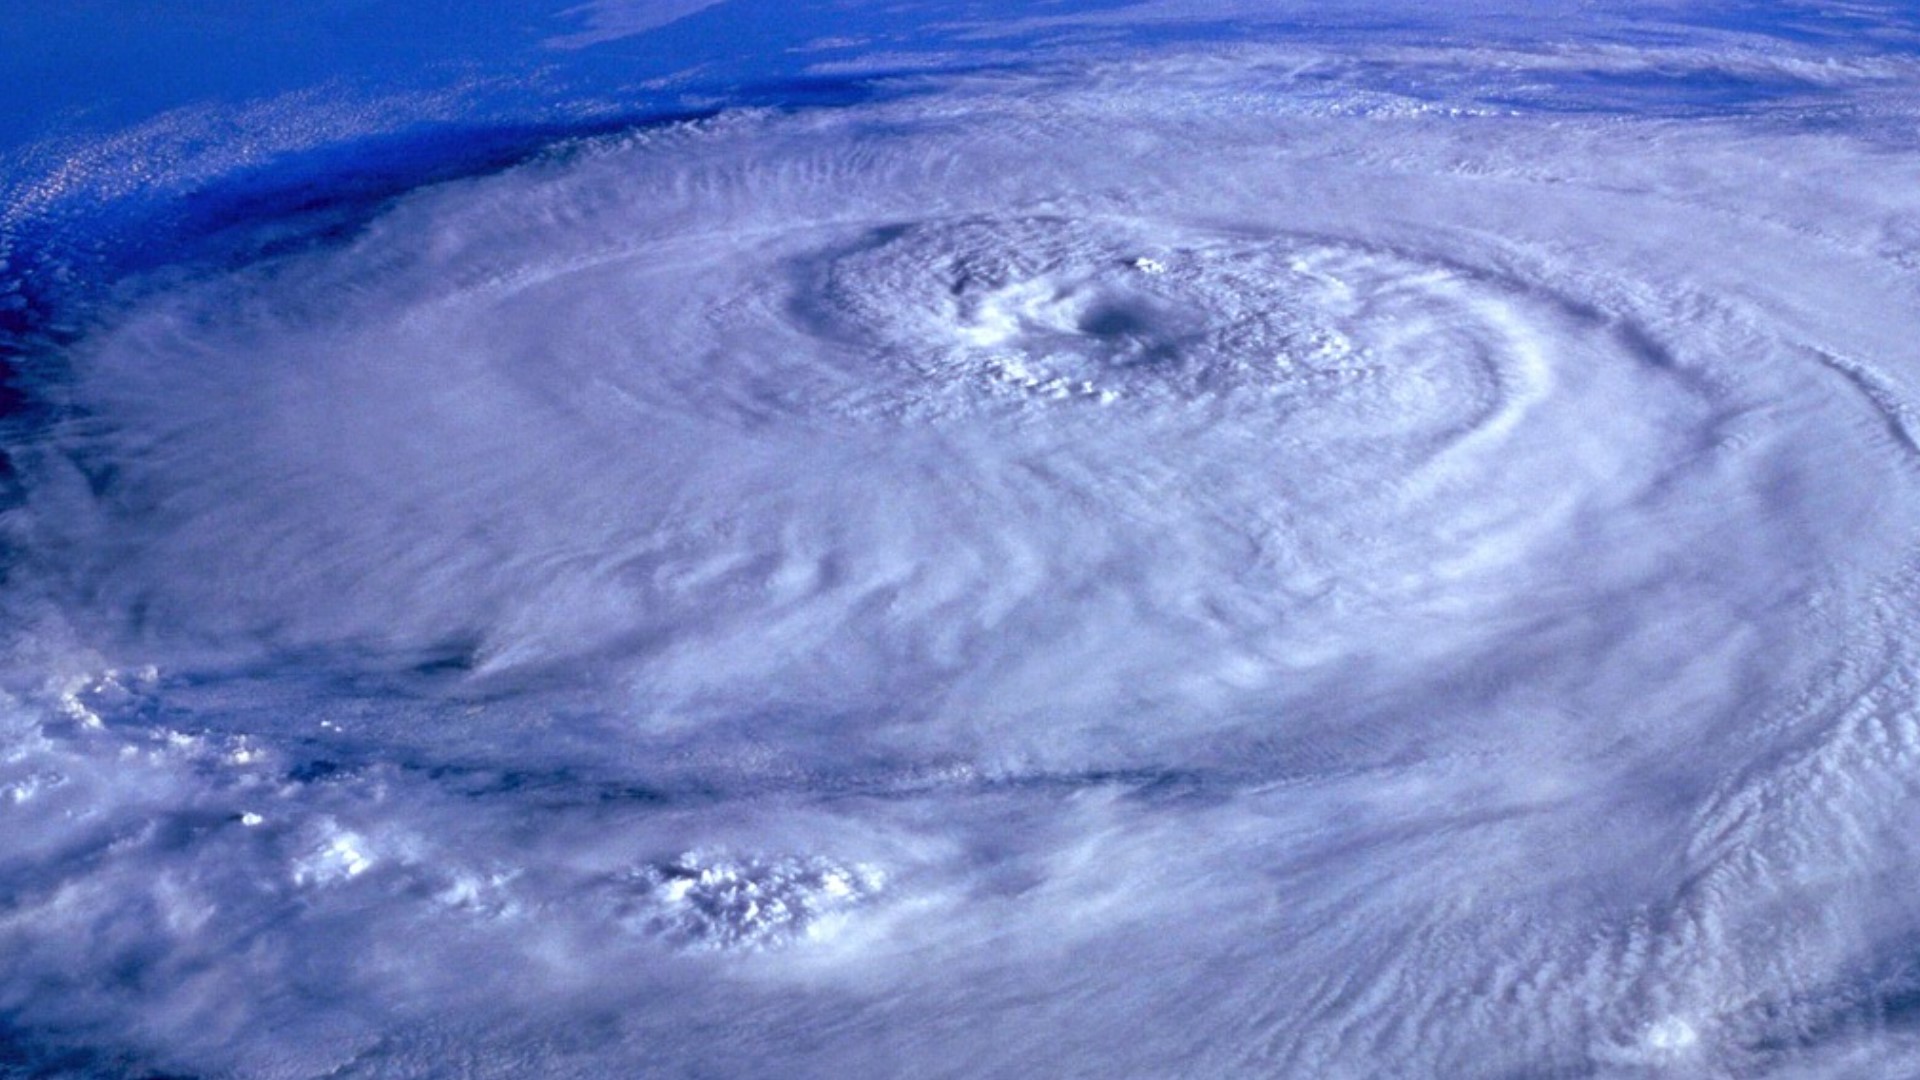 Scientists published a study on Monday suggesting a major change in the way hurricanes are categorized.